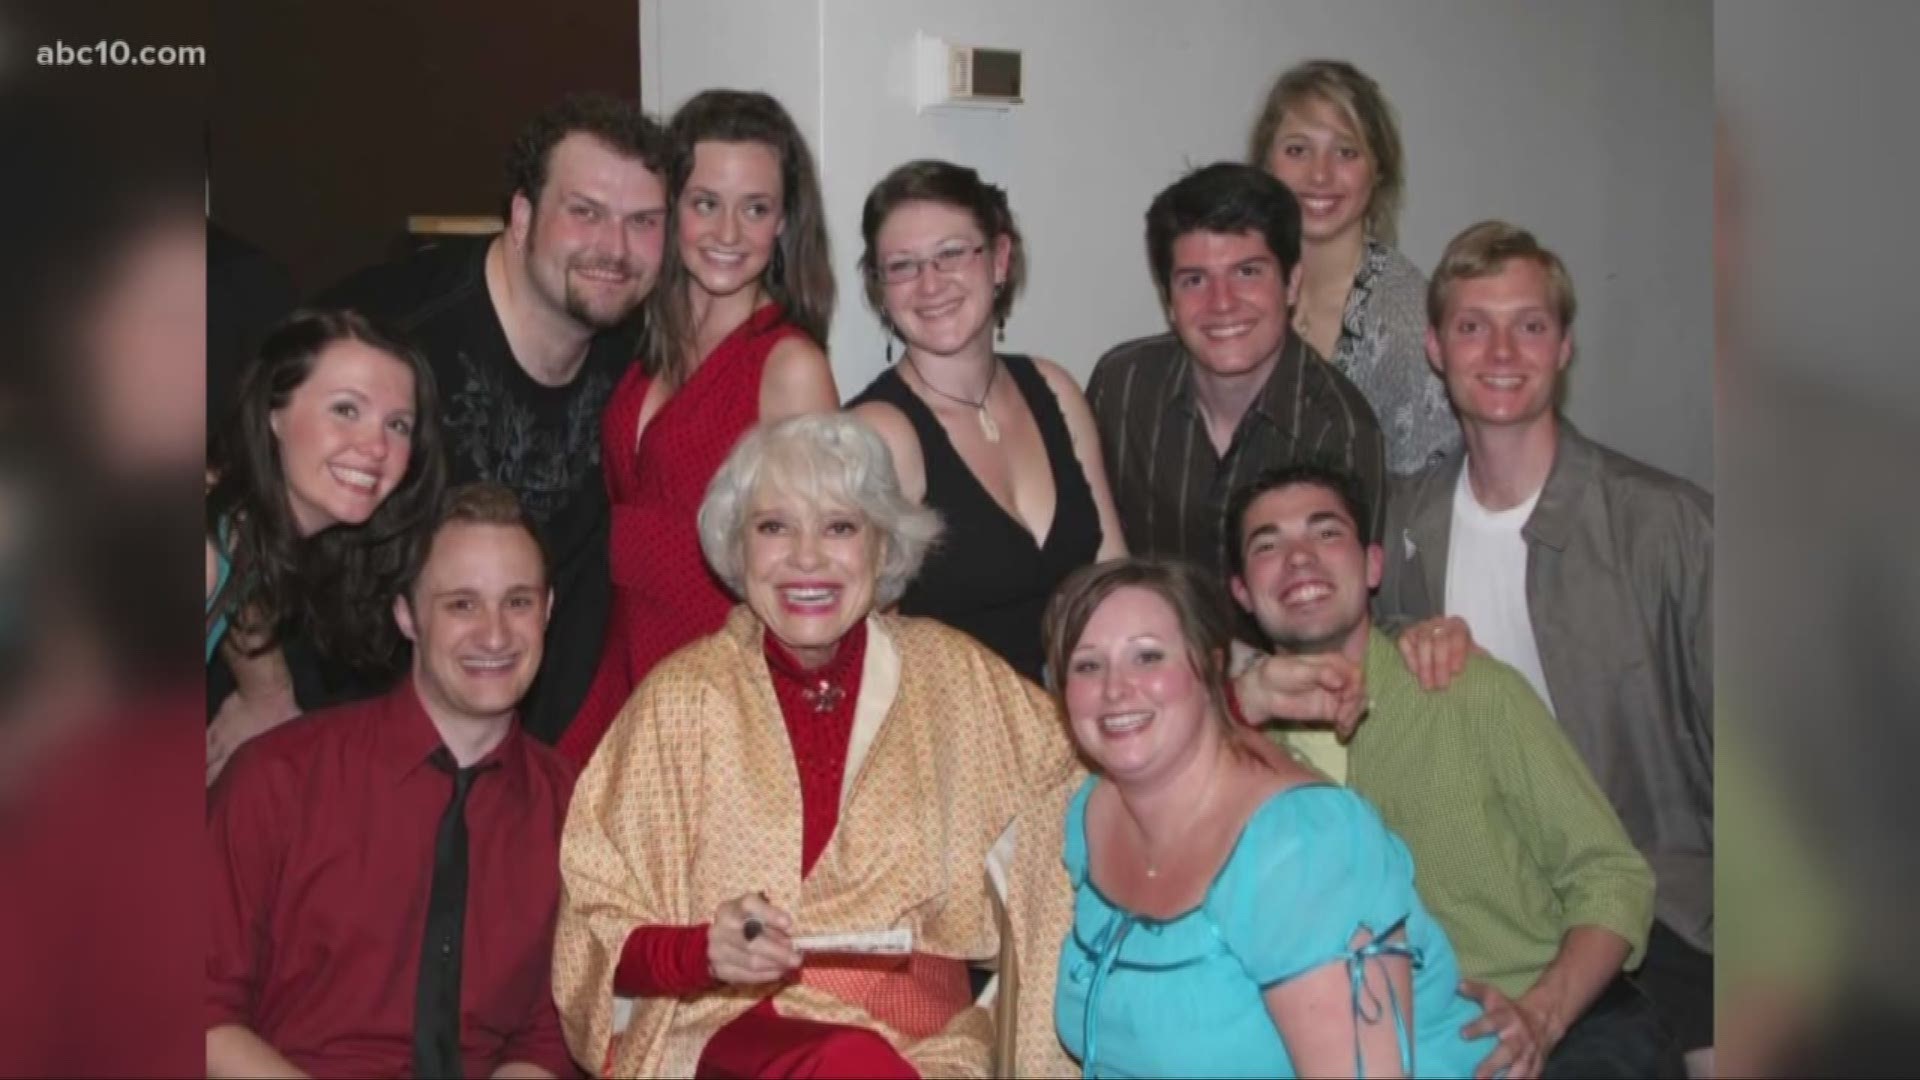 The entertainment world is remembering Broadway legend Carol Channing. Her publicist says she died of natural causes in Rancho Mirage at the age of 97.